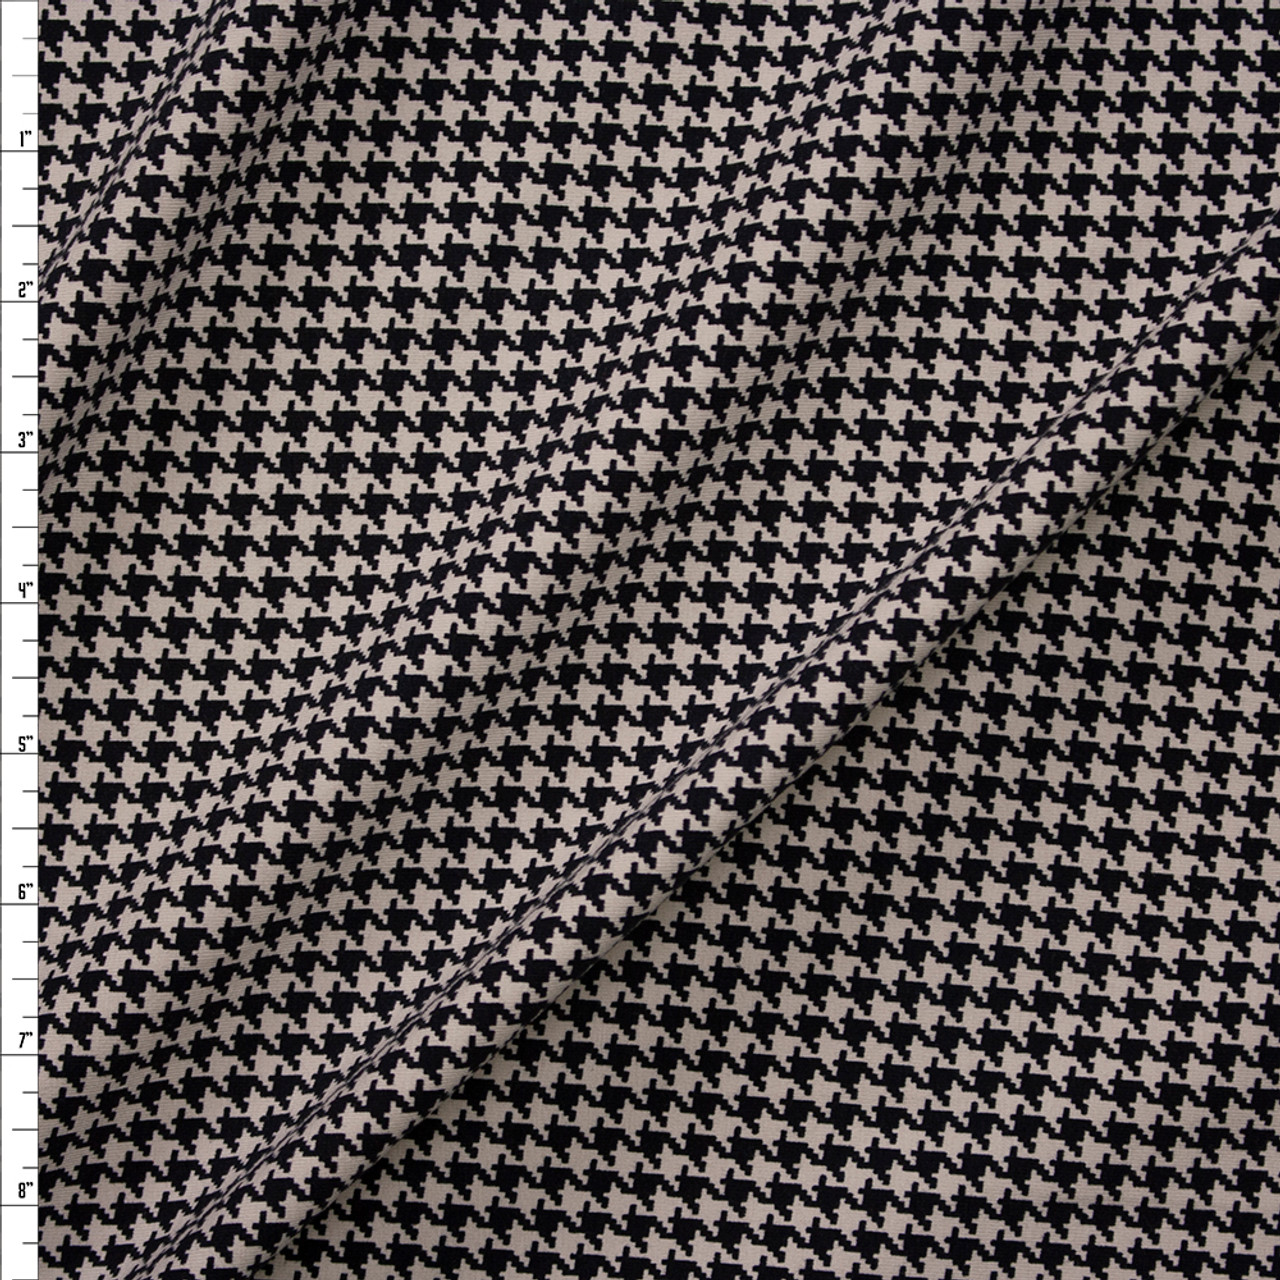 Cali Fabrics Light Tan and Black Houndstooth Fabric by the Yard